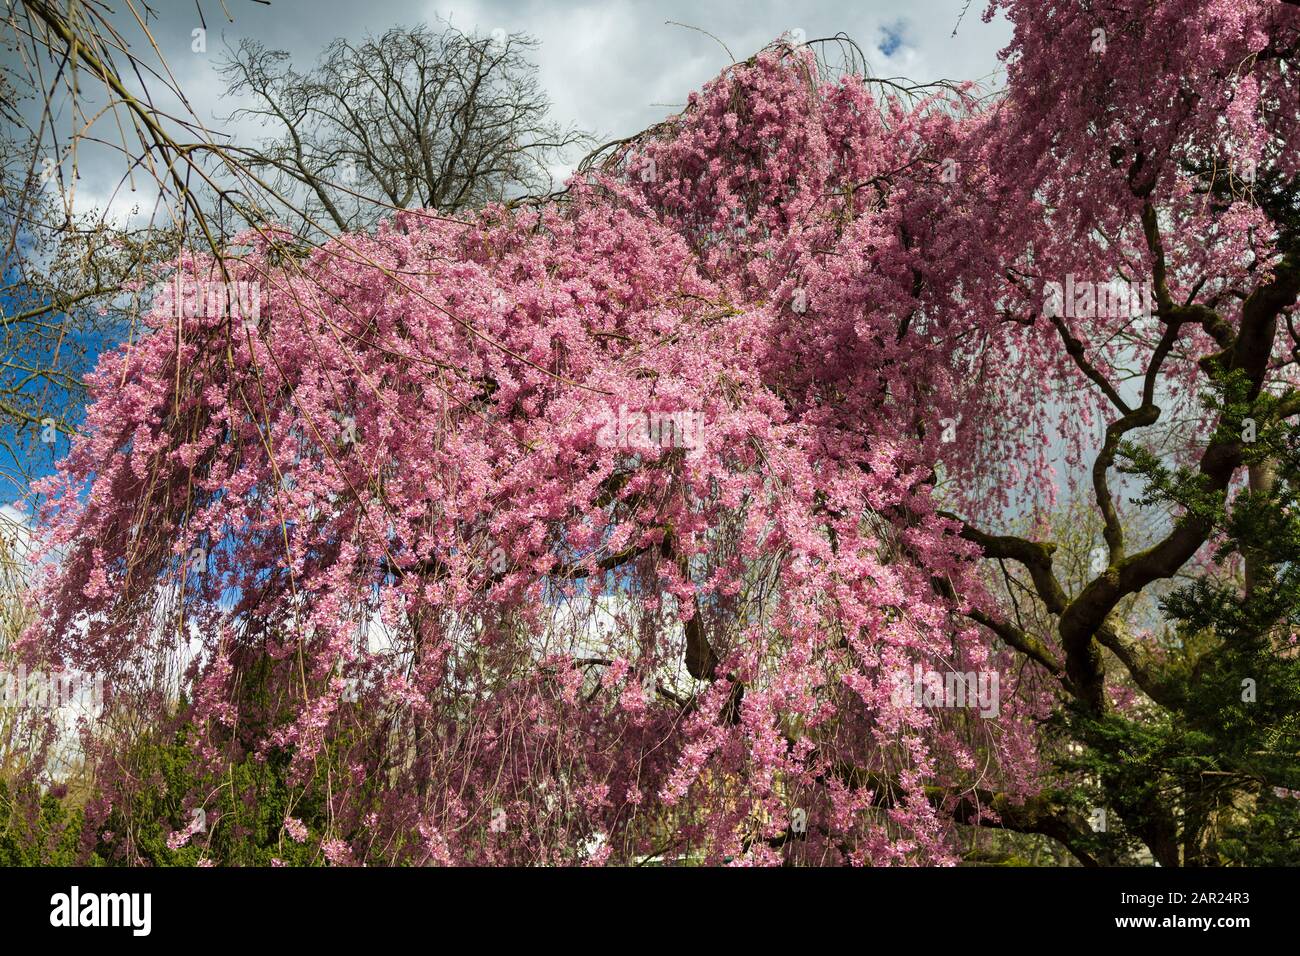 Detail of a Higan cherry tree in full blossom in spring, Frankfurt, Germany Stock Photo